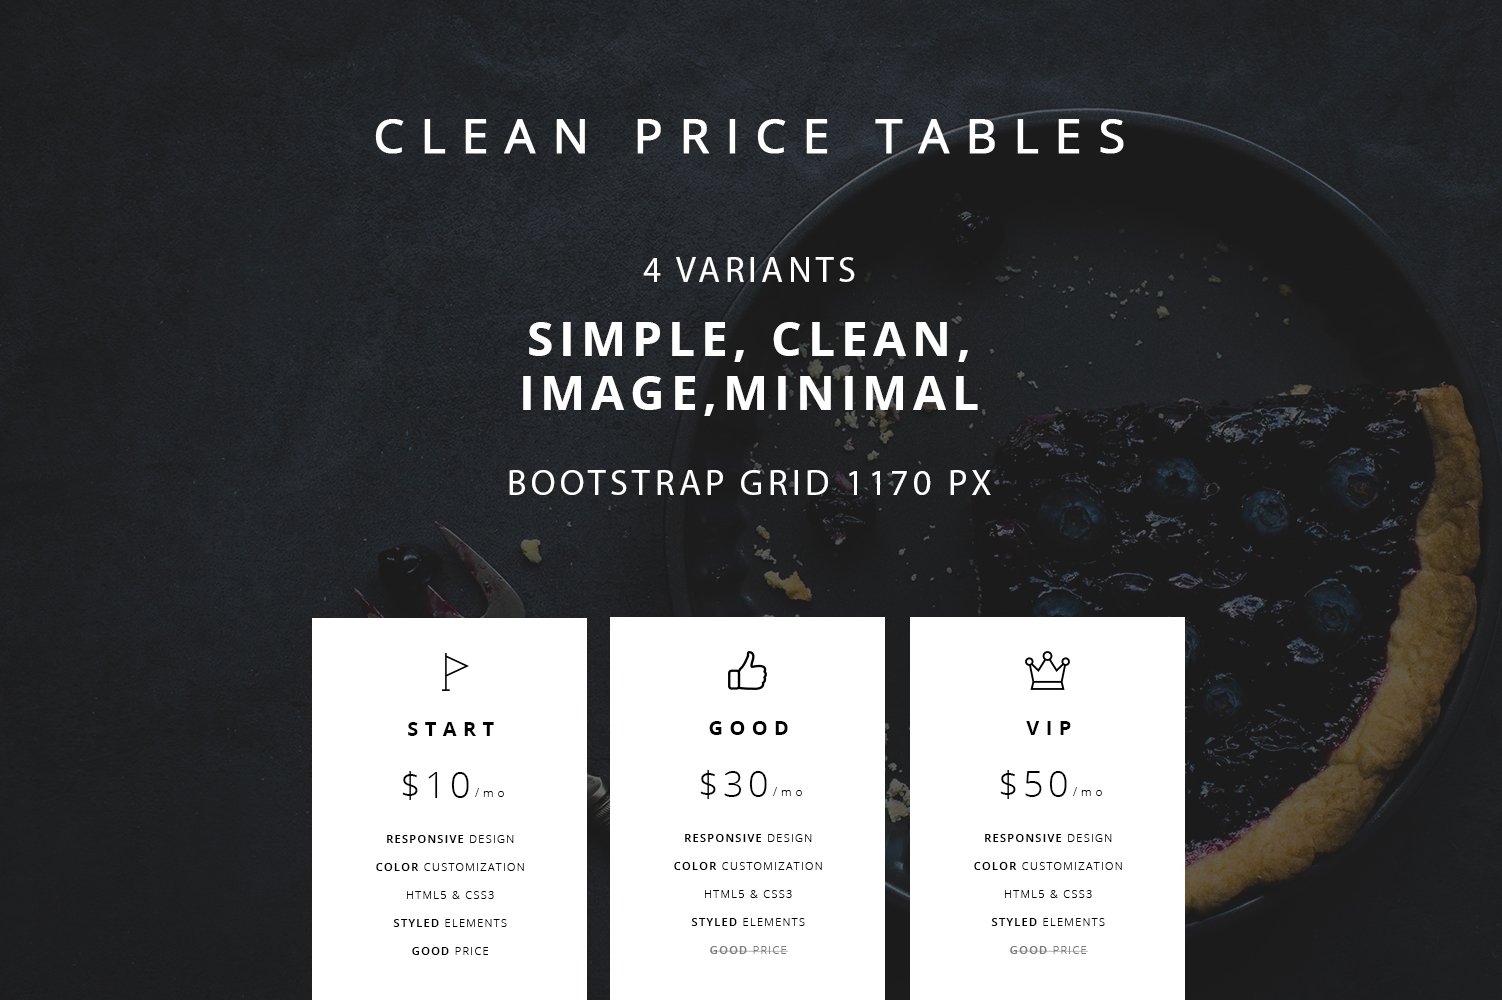 Clean price tables - HTML ver. cover image.